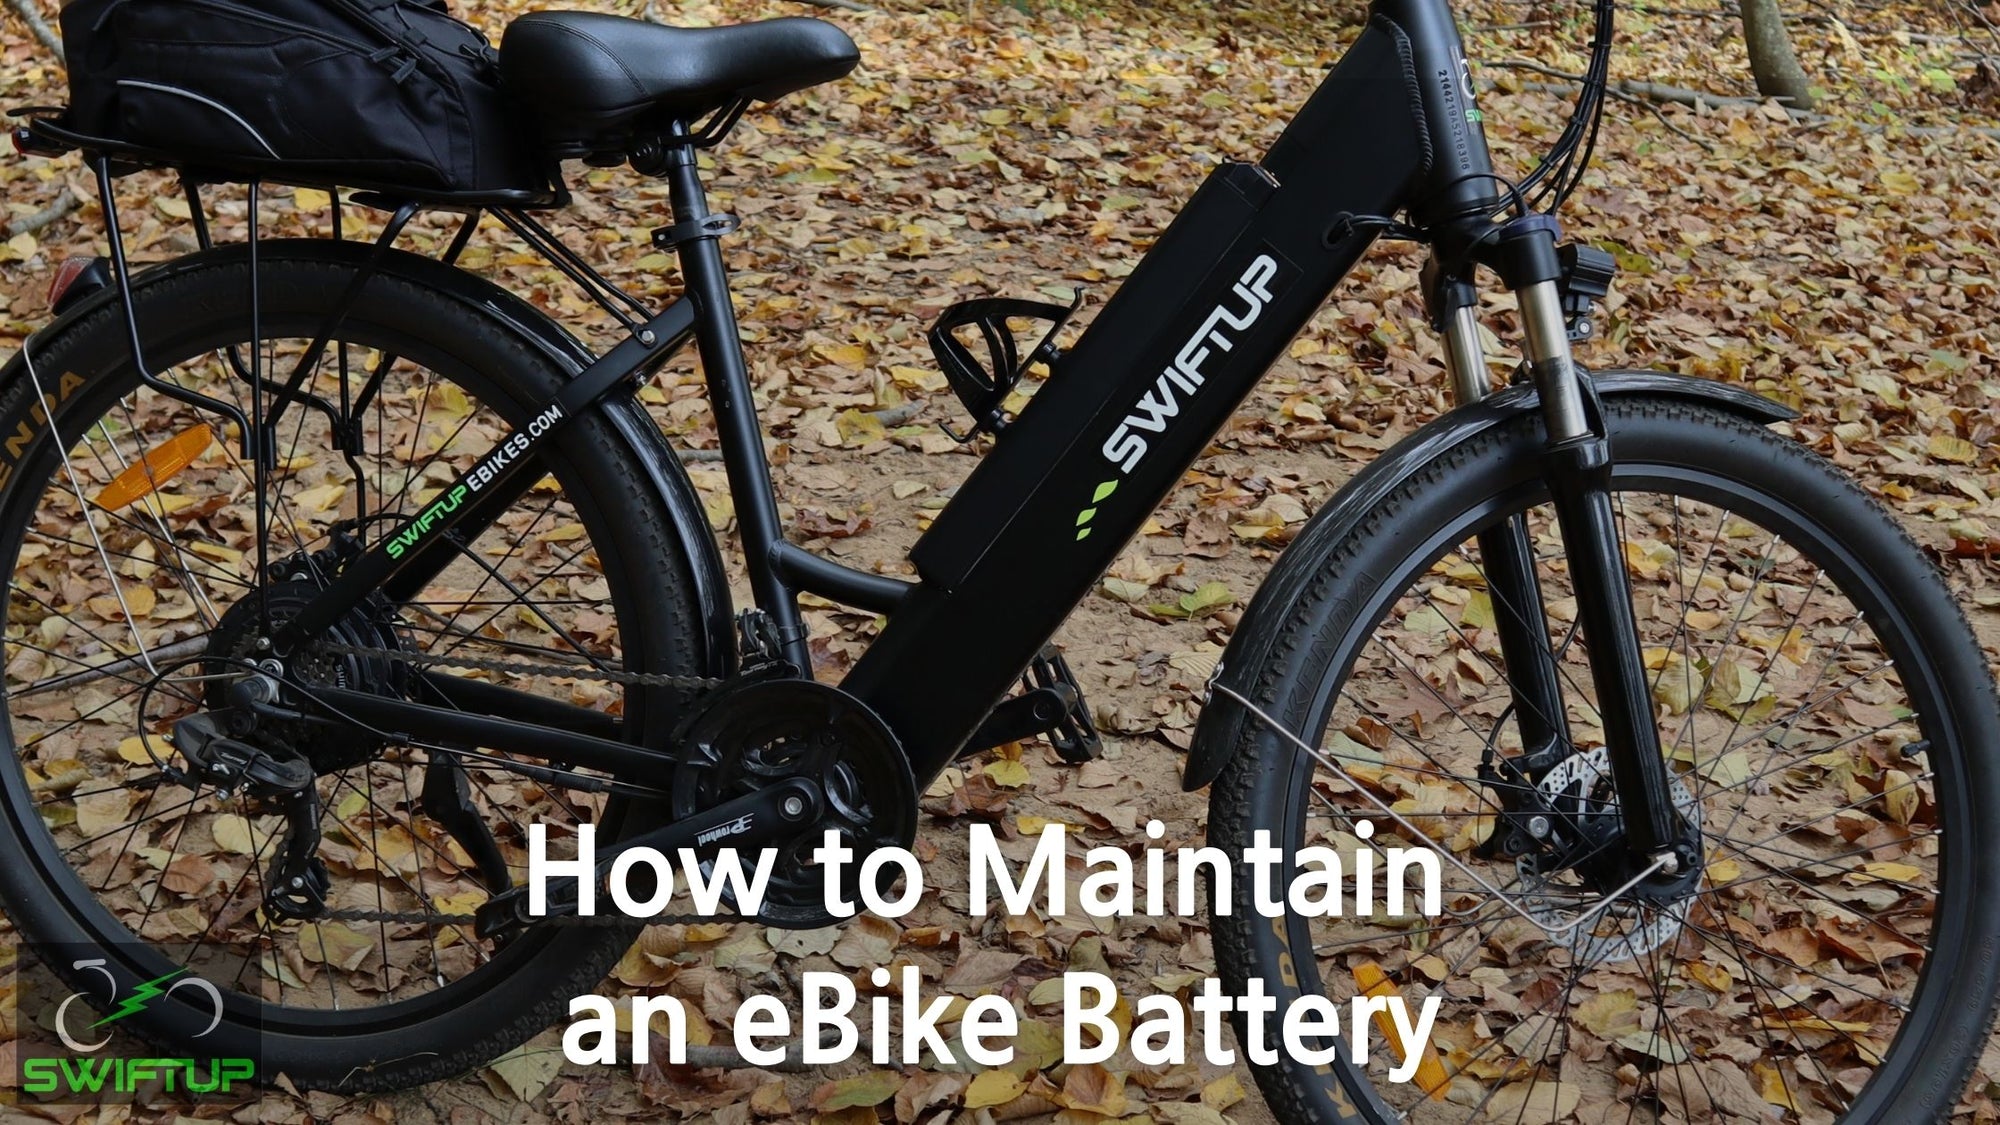 How to Maintain an eBike Battery